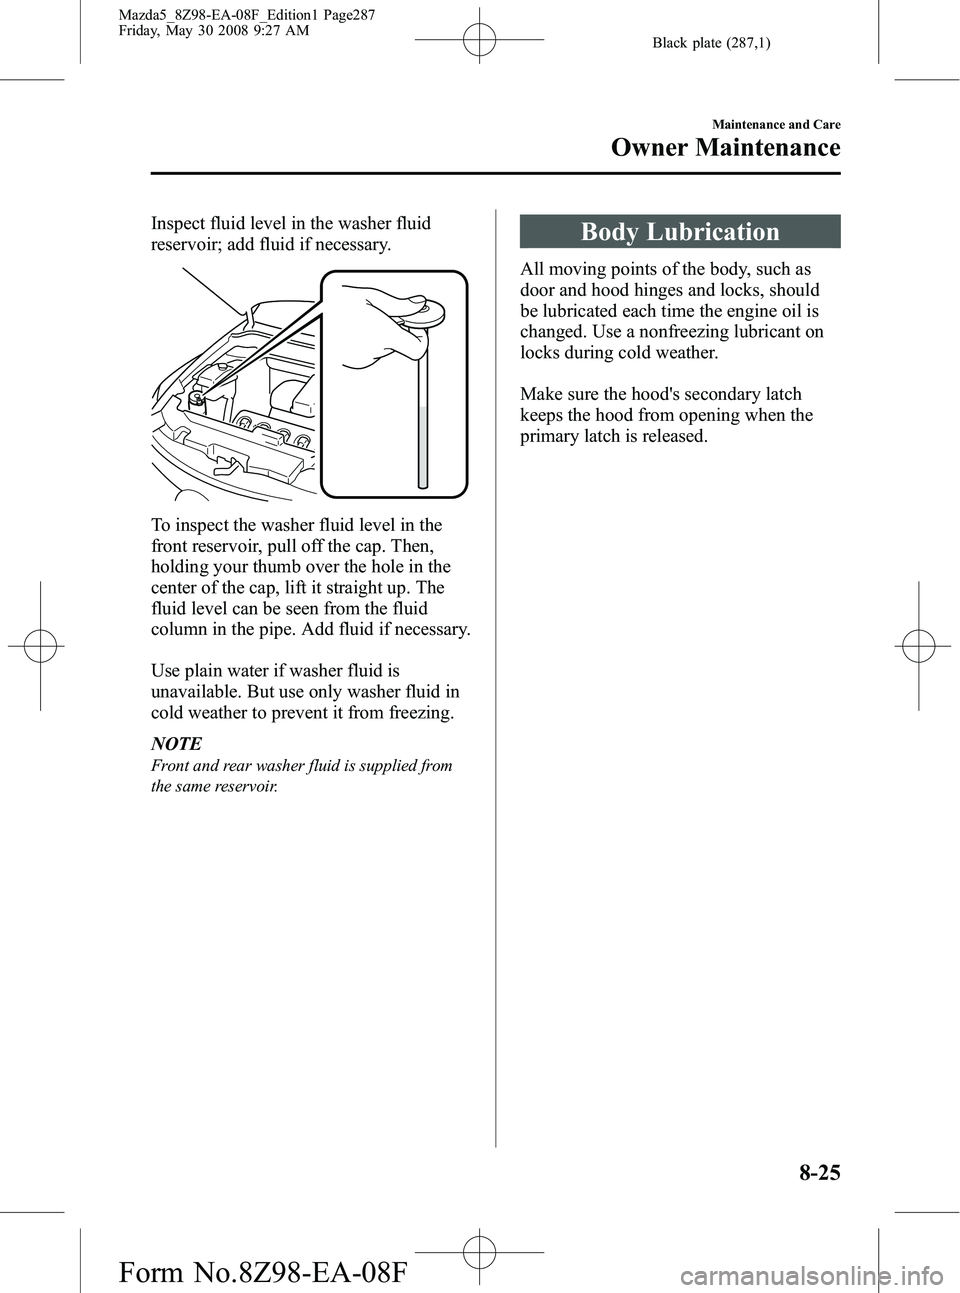 MAZDA MODEL 5 2009 Owners Manual Black plate (287,1)
Inspect fluid level in the washer fluid
reservoir; add fluid if necessary.
To inspect the washer fluid level in the
front reservoir, pull off the cap. Then,
holding your thumb over